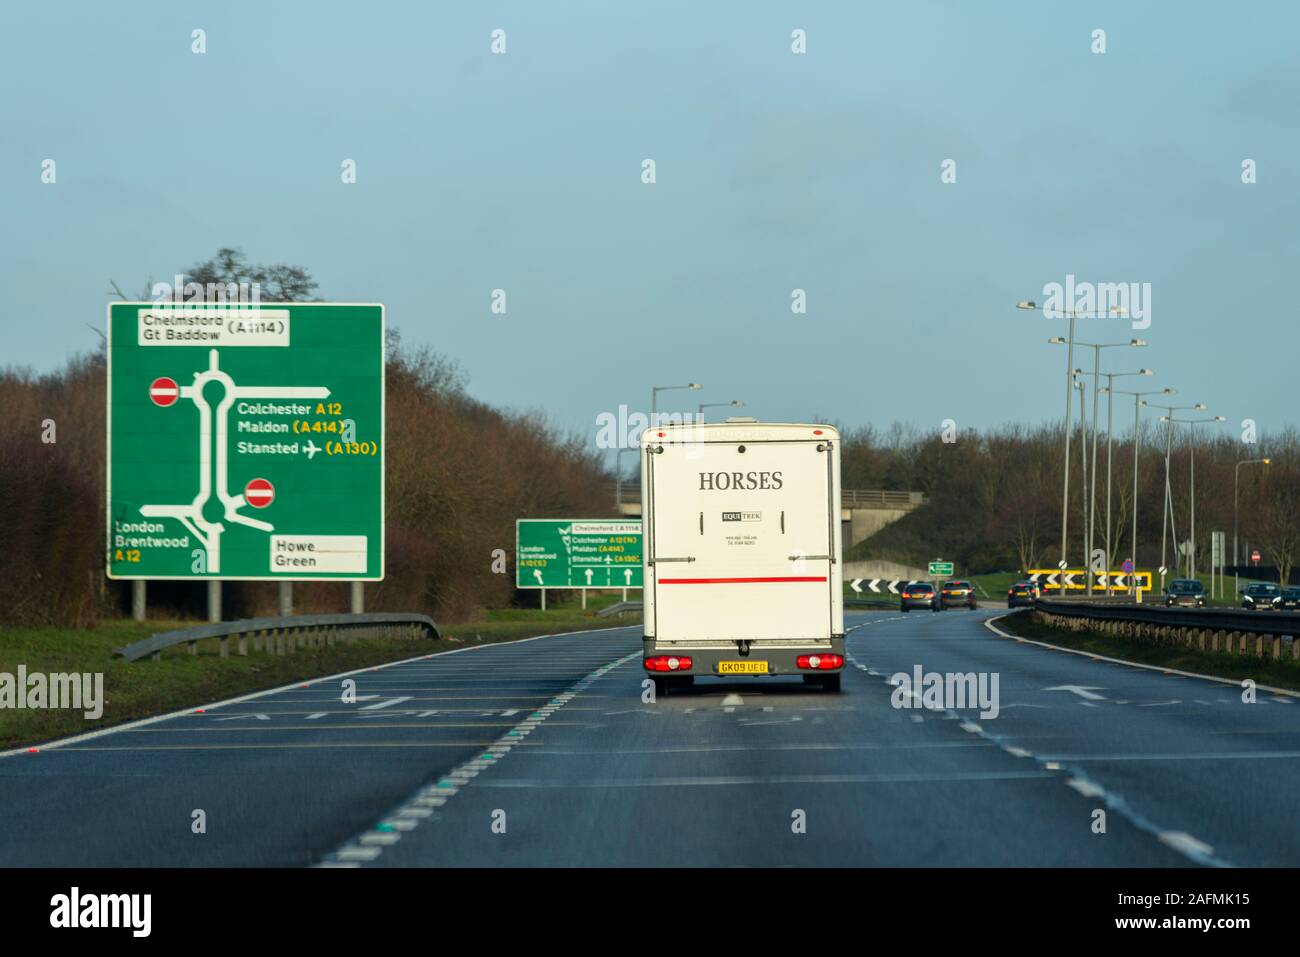 Destination sign with vehicles approaching A12 Chelmsford, Essex, UK driving on a stretch of A130 duel carriageway. Horse box. Colchester Stock Photo